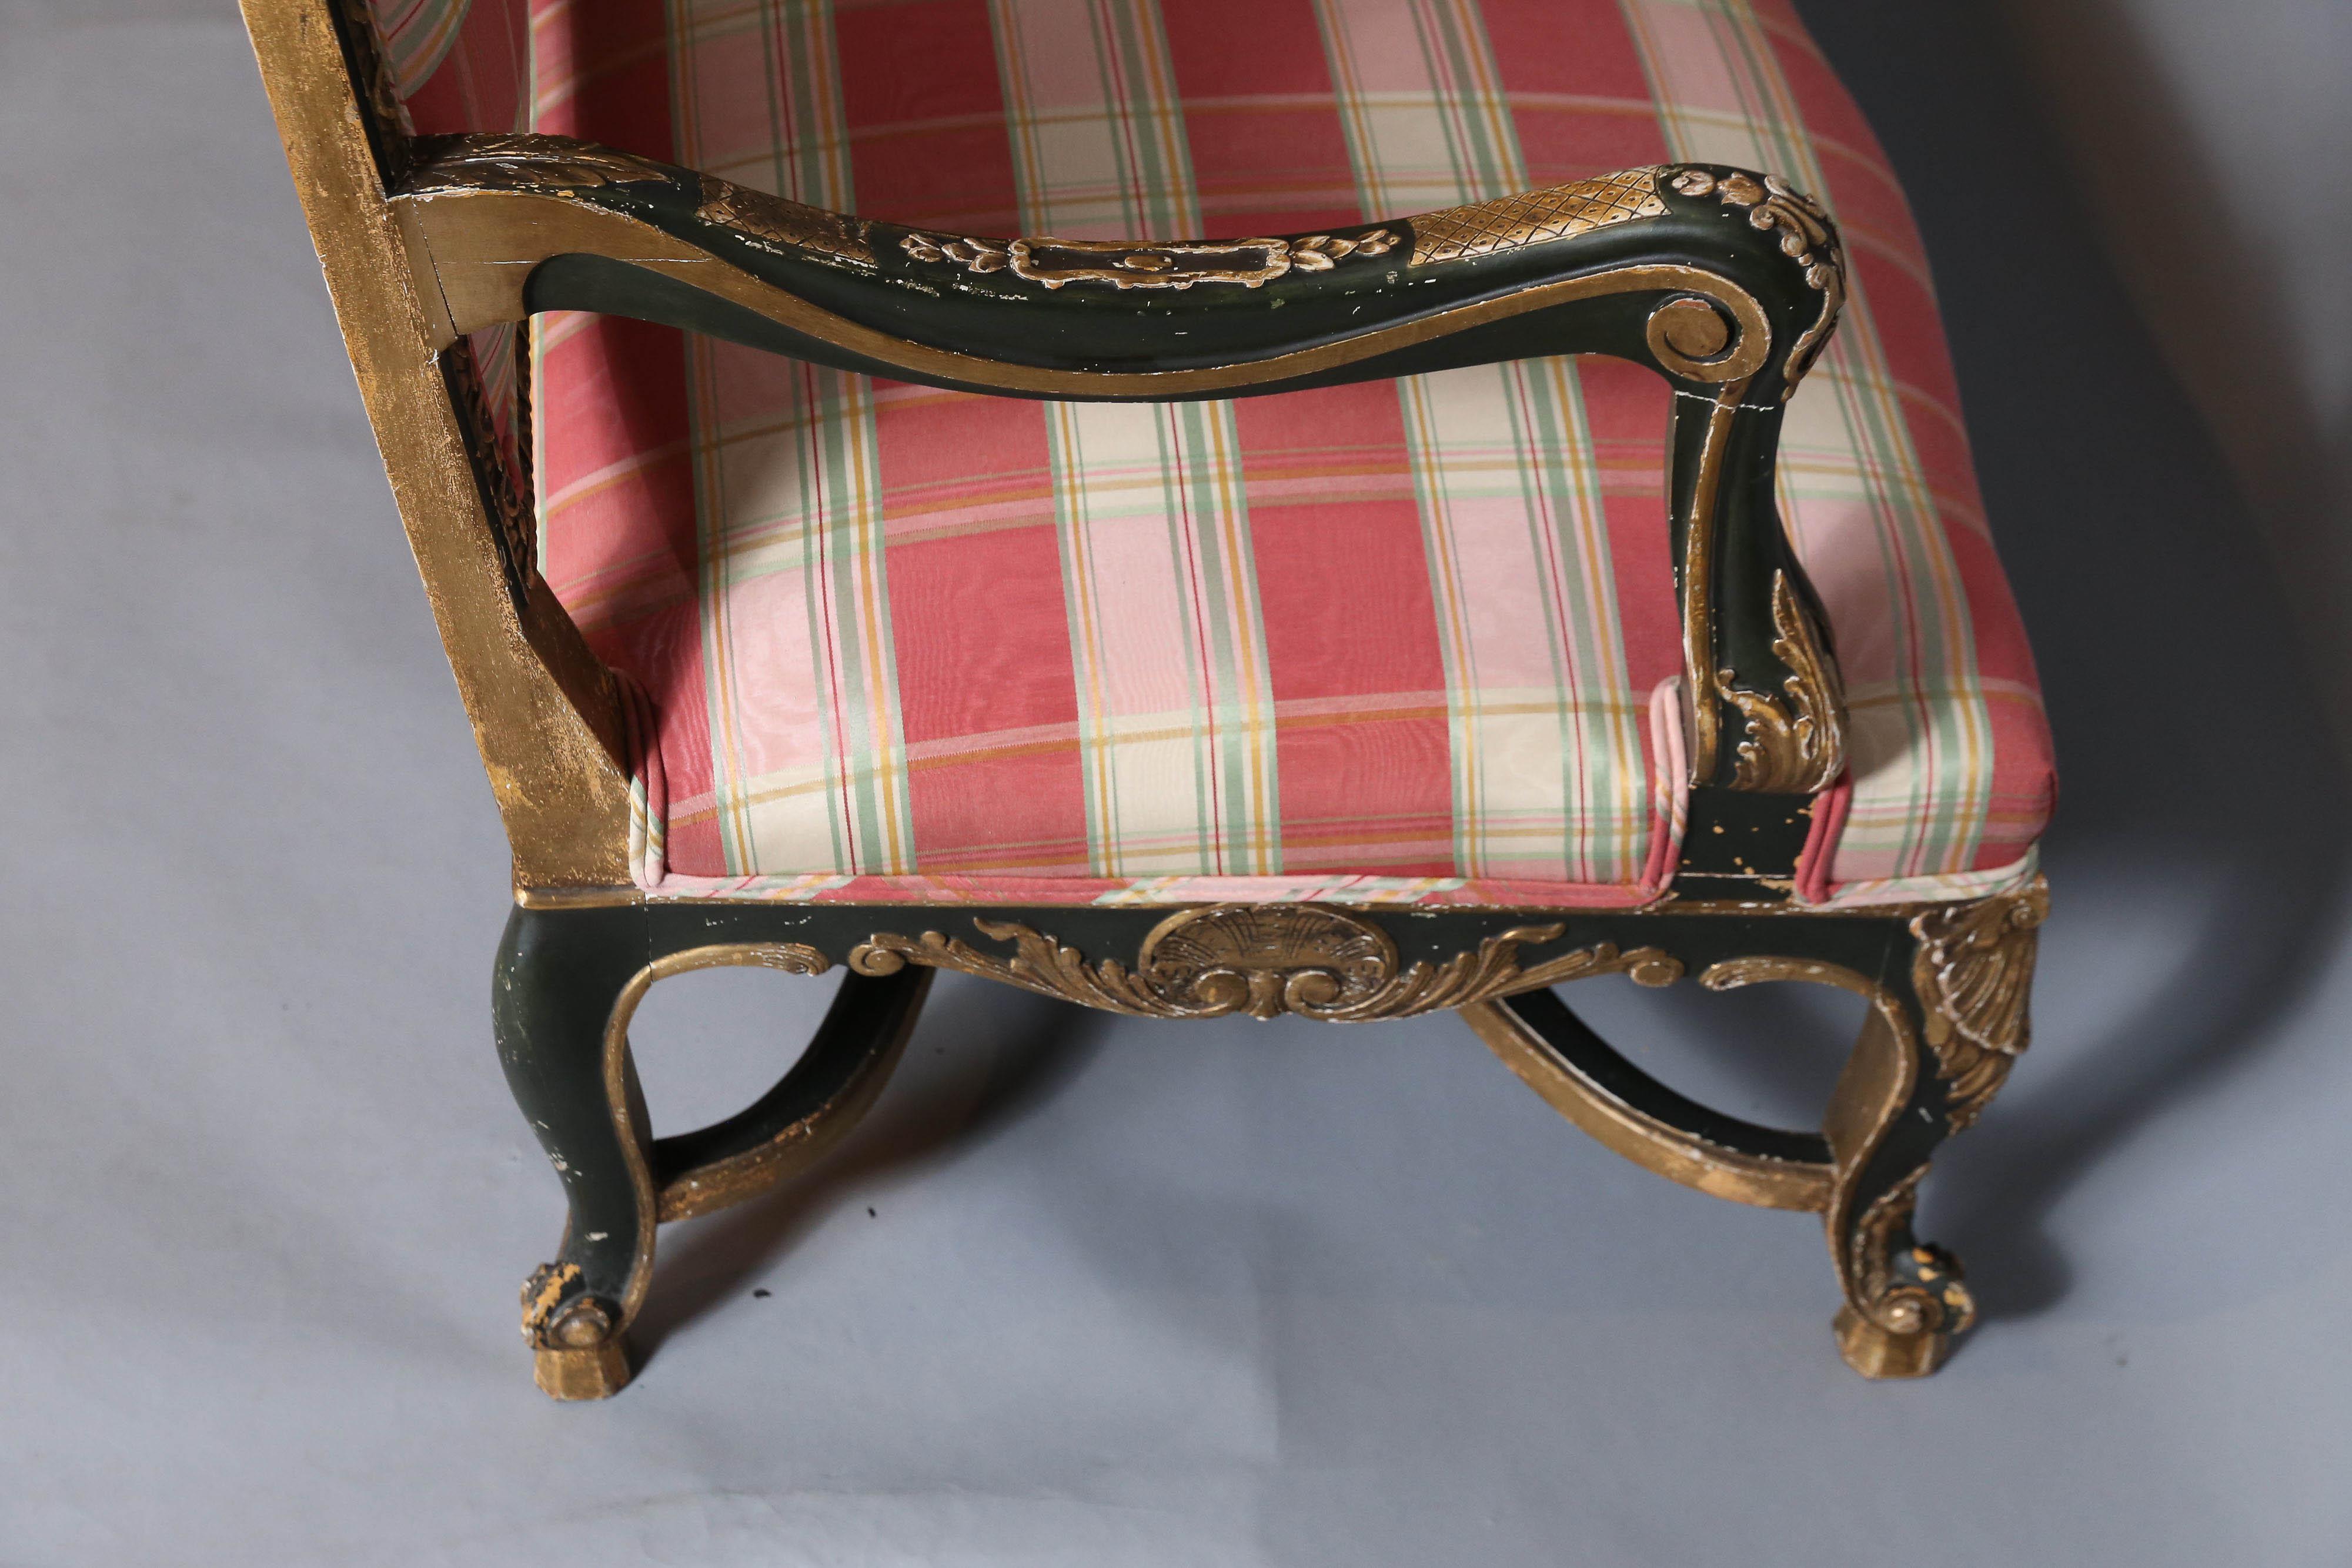  French Regence Period Black and Gilt  Carved Settee For Sale 6